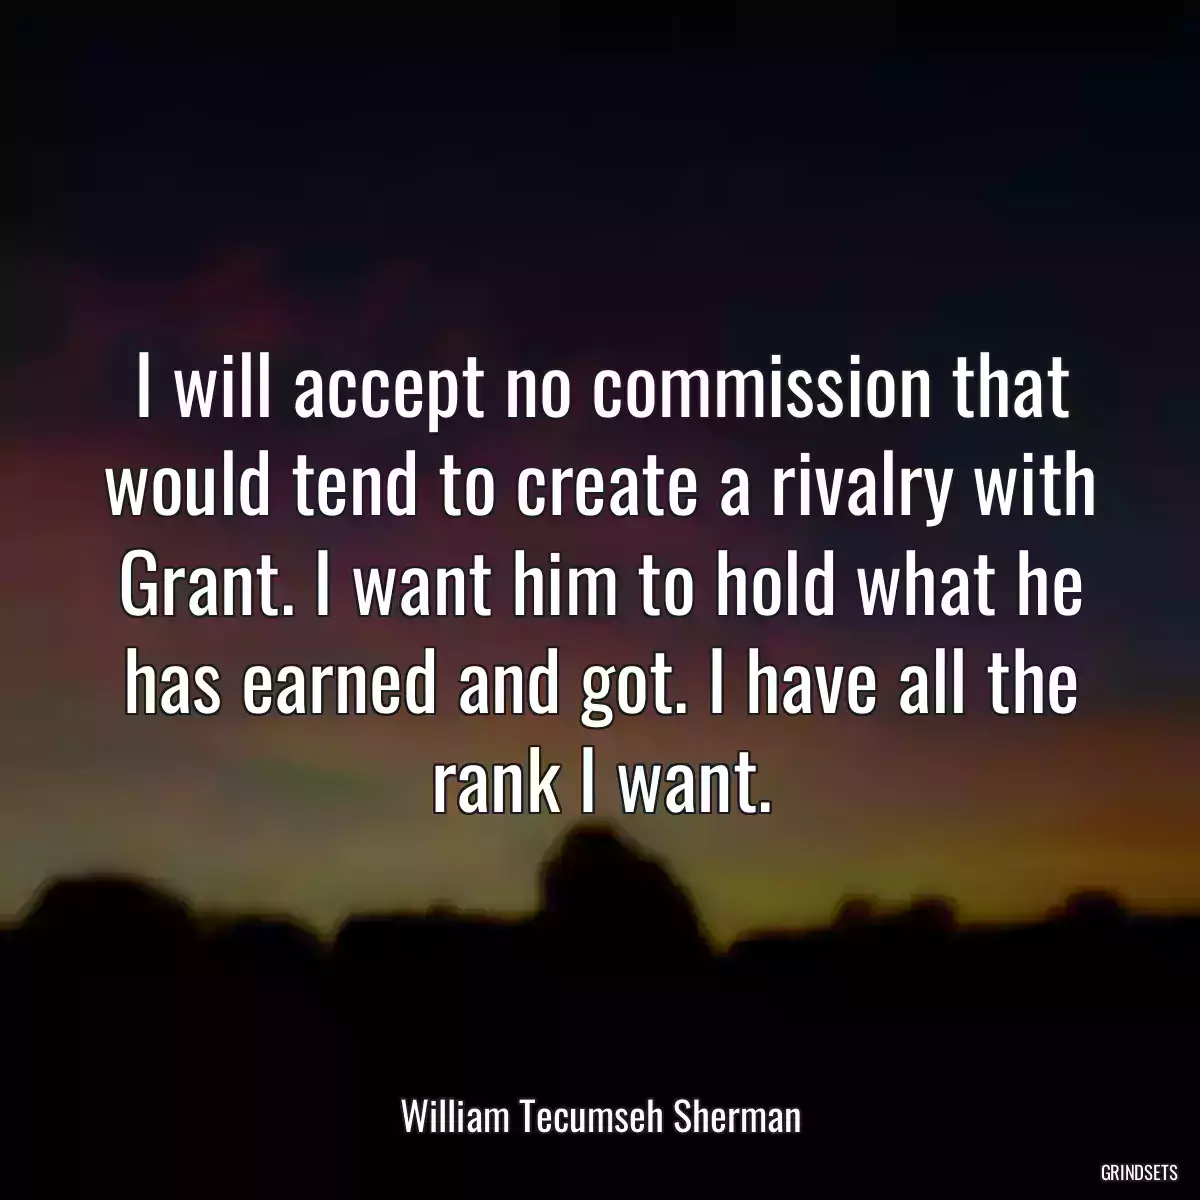 I will accept no commission that would tend to create a rivalry with Grant. I want him to hold what he has earned and got. I have all the rank I want.